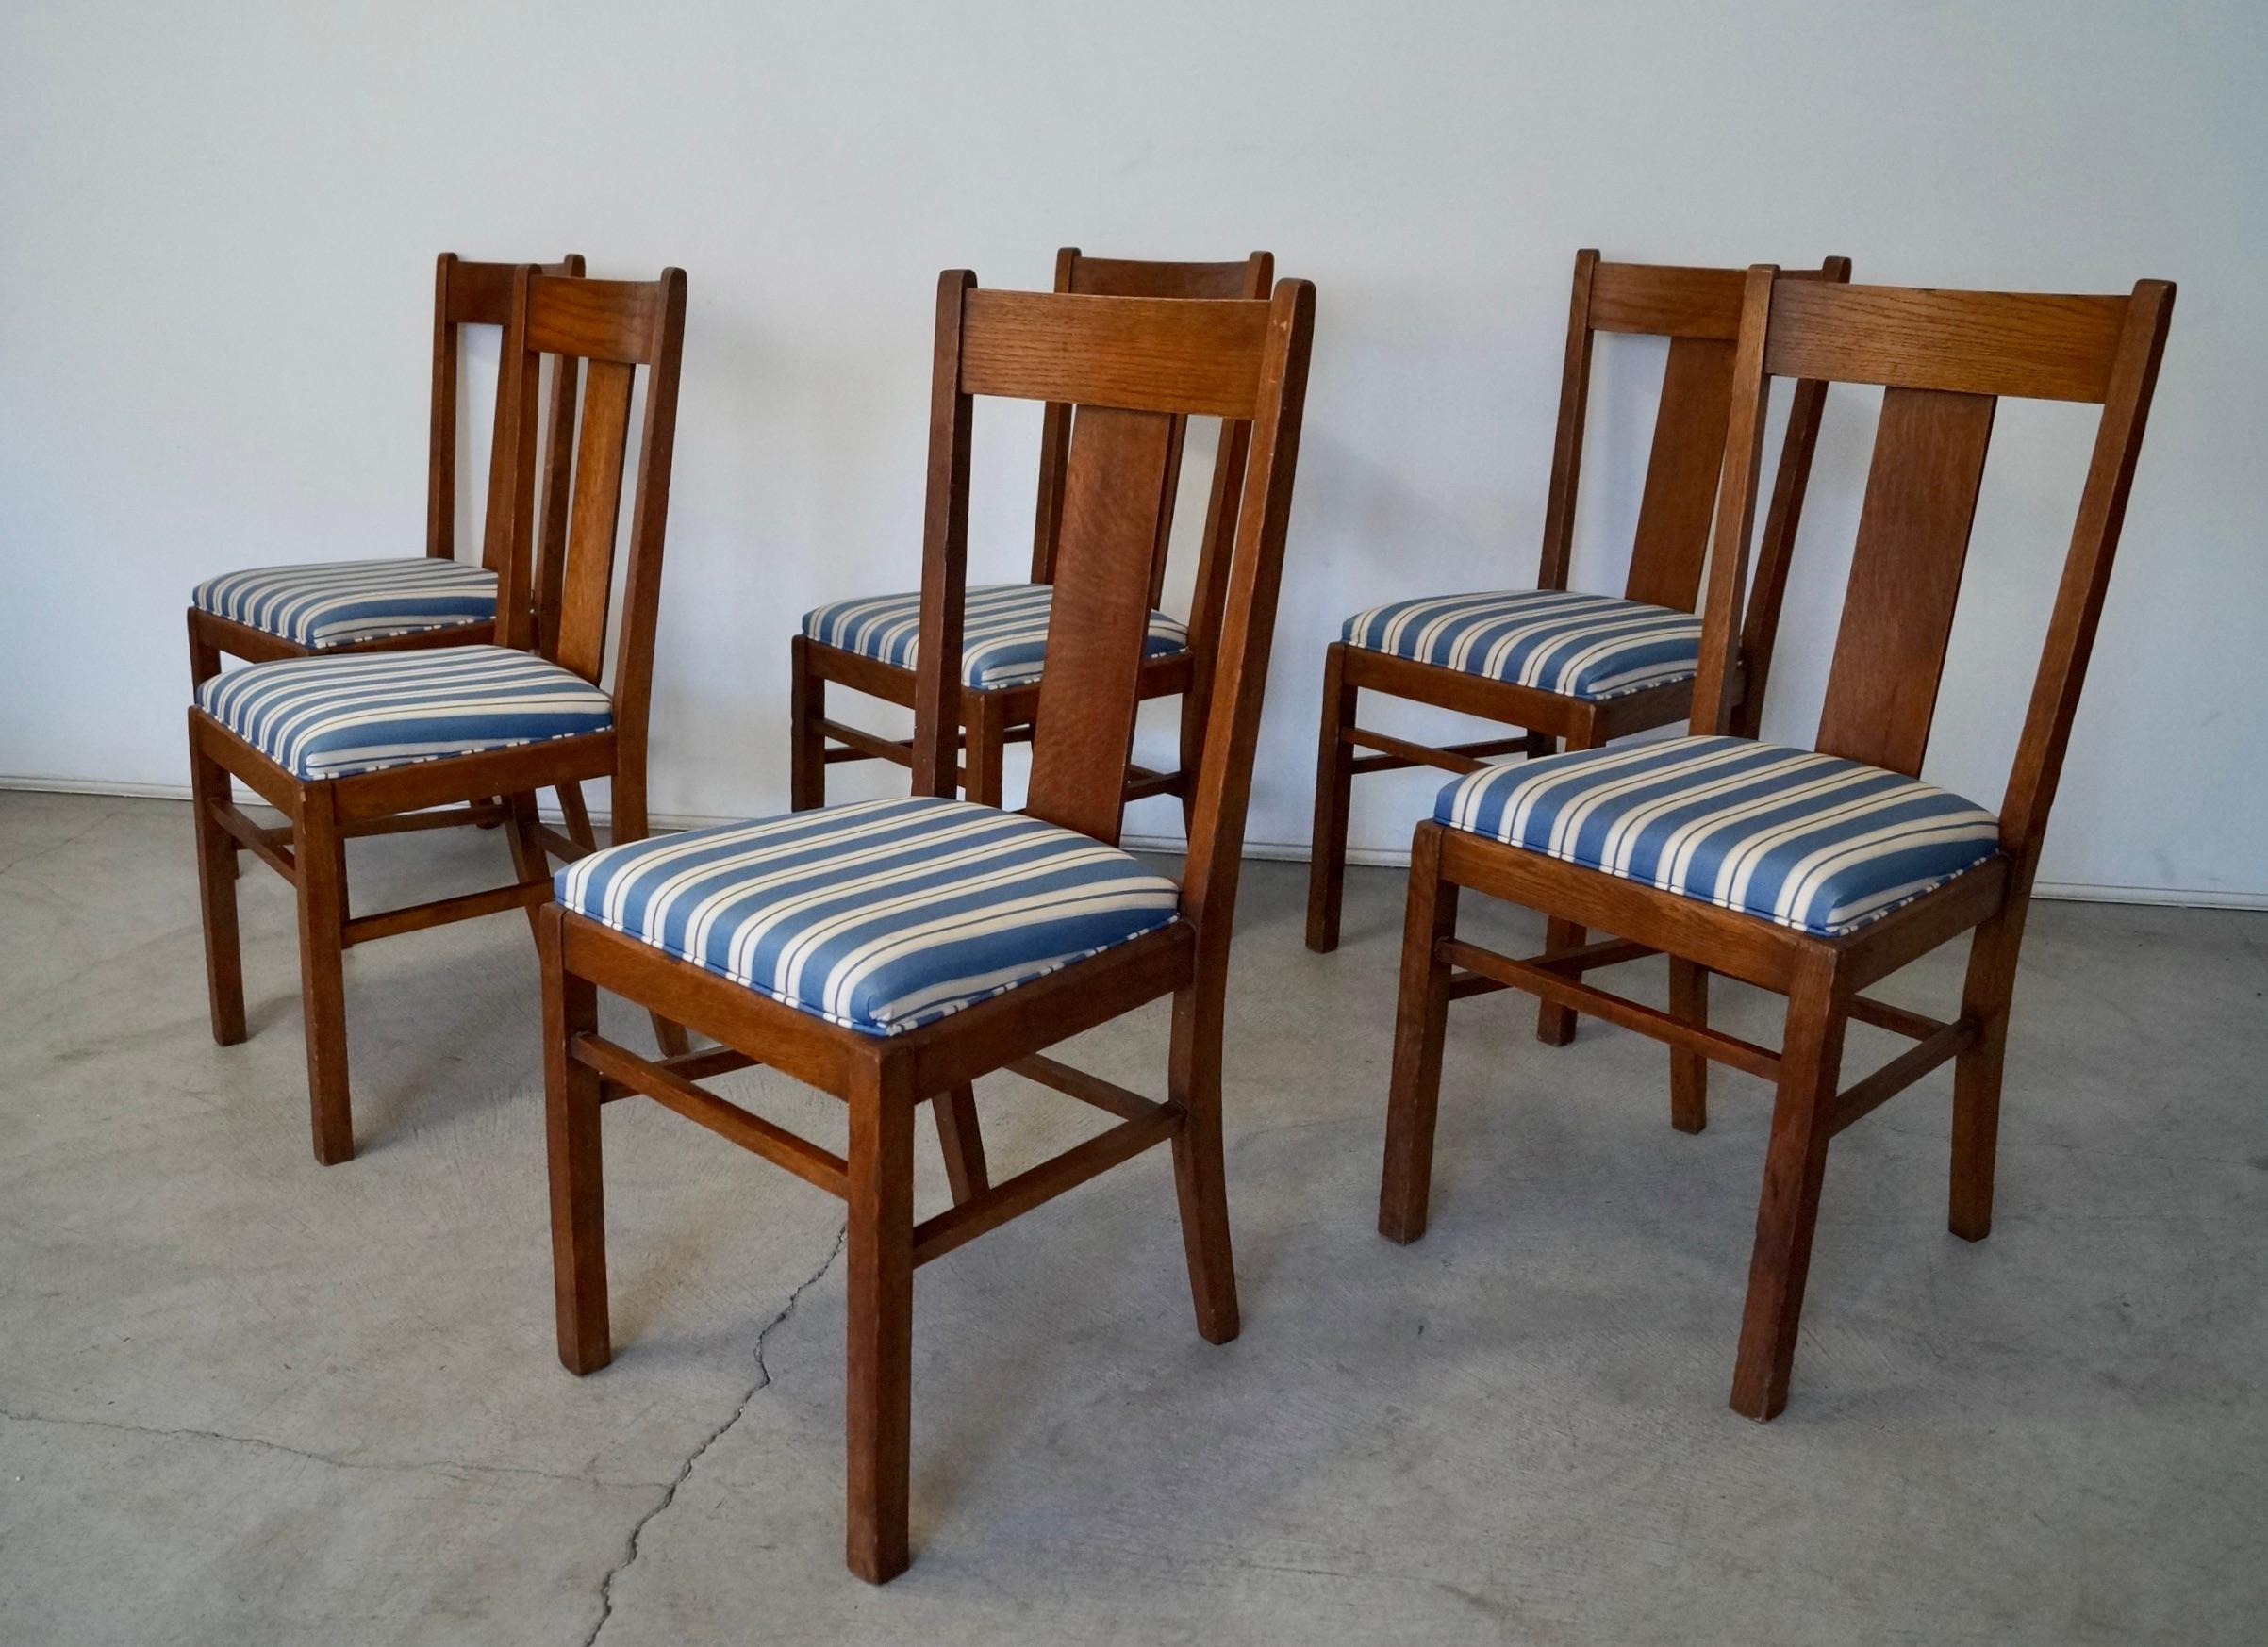 Antique original Mission Spanish dining chairs for sale. These are a set of six, and were manufactured by Heywood Brothers and Wakefield Company in the early 1900's. They still have the original label. Heywood Brothers went on to become Heywood